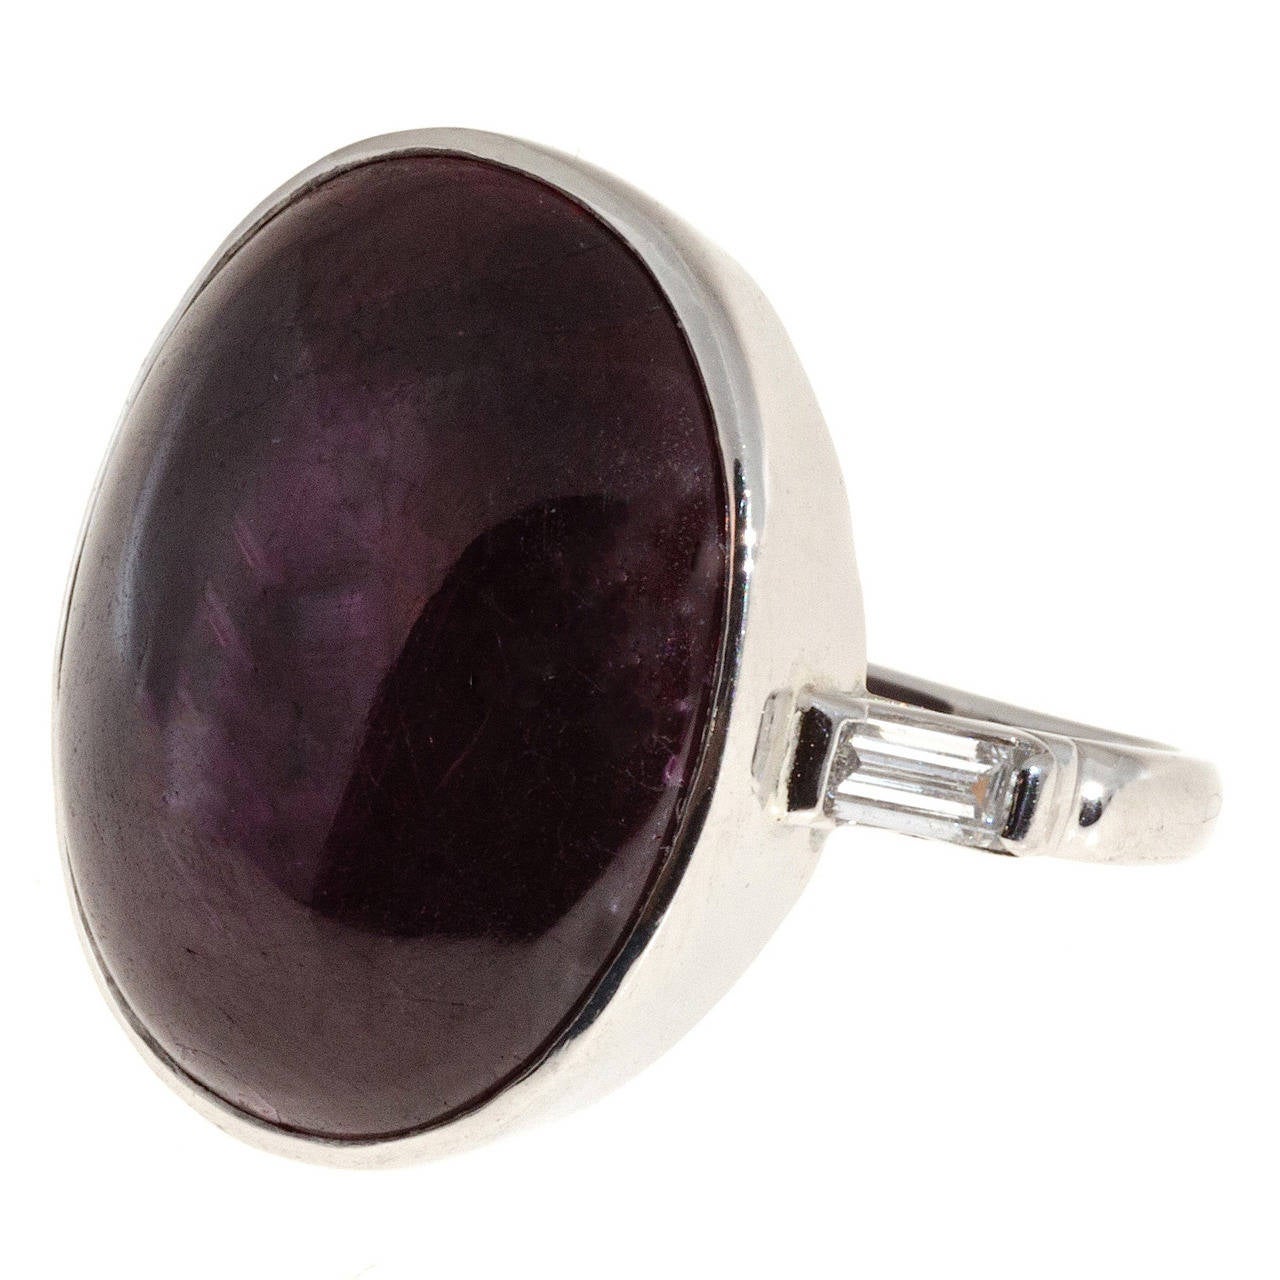 Platinum bezel set oval cabochon ruby and diamond cocktail ring. Handmade baguette side diamond setting, with a large all natural no heat no enhancement 17.90ct dark purplish red Ruby center. 

17.90ct natural no heat Ruby cabochon dark purplish red